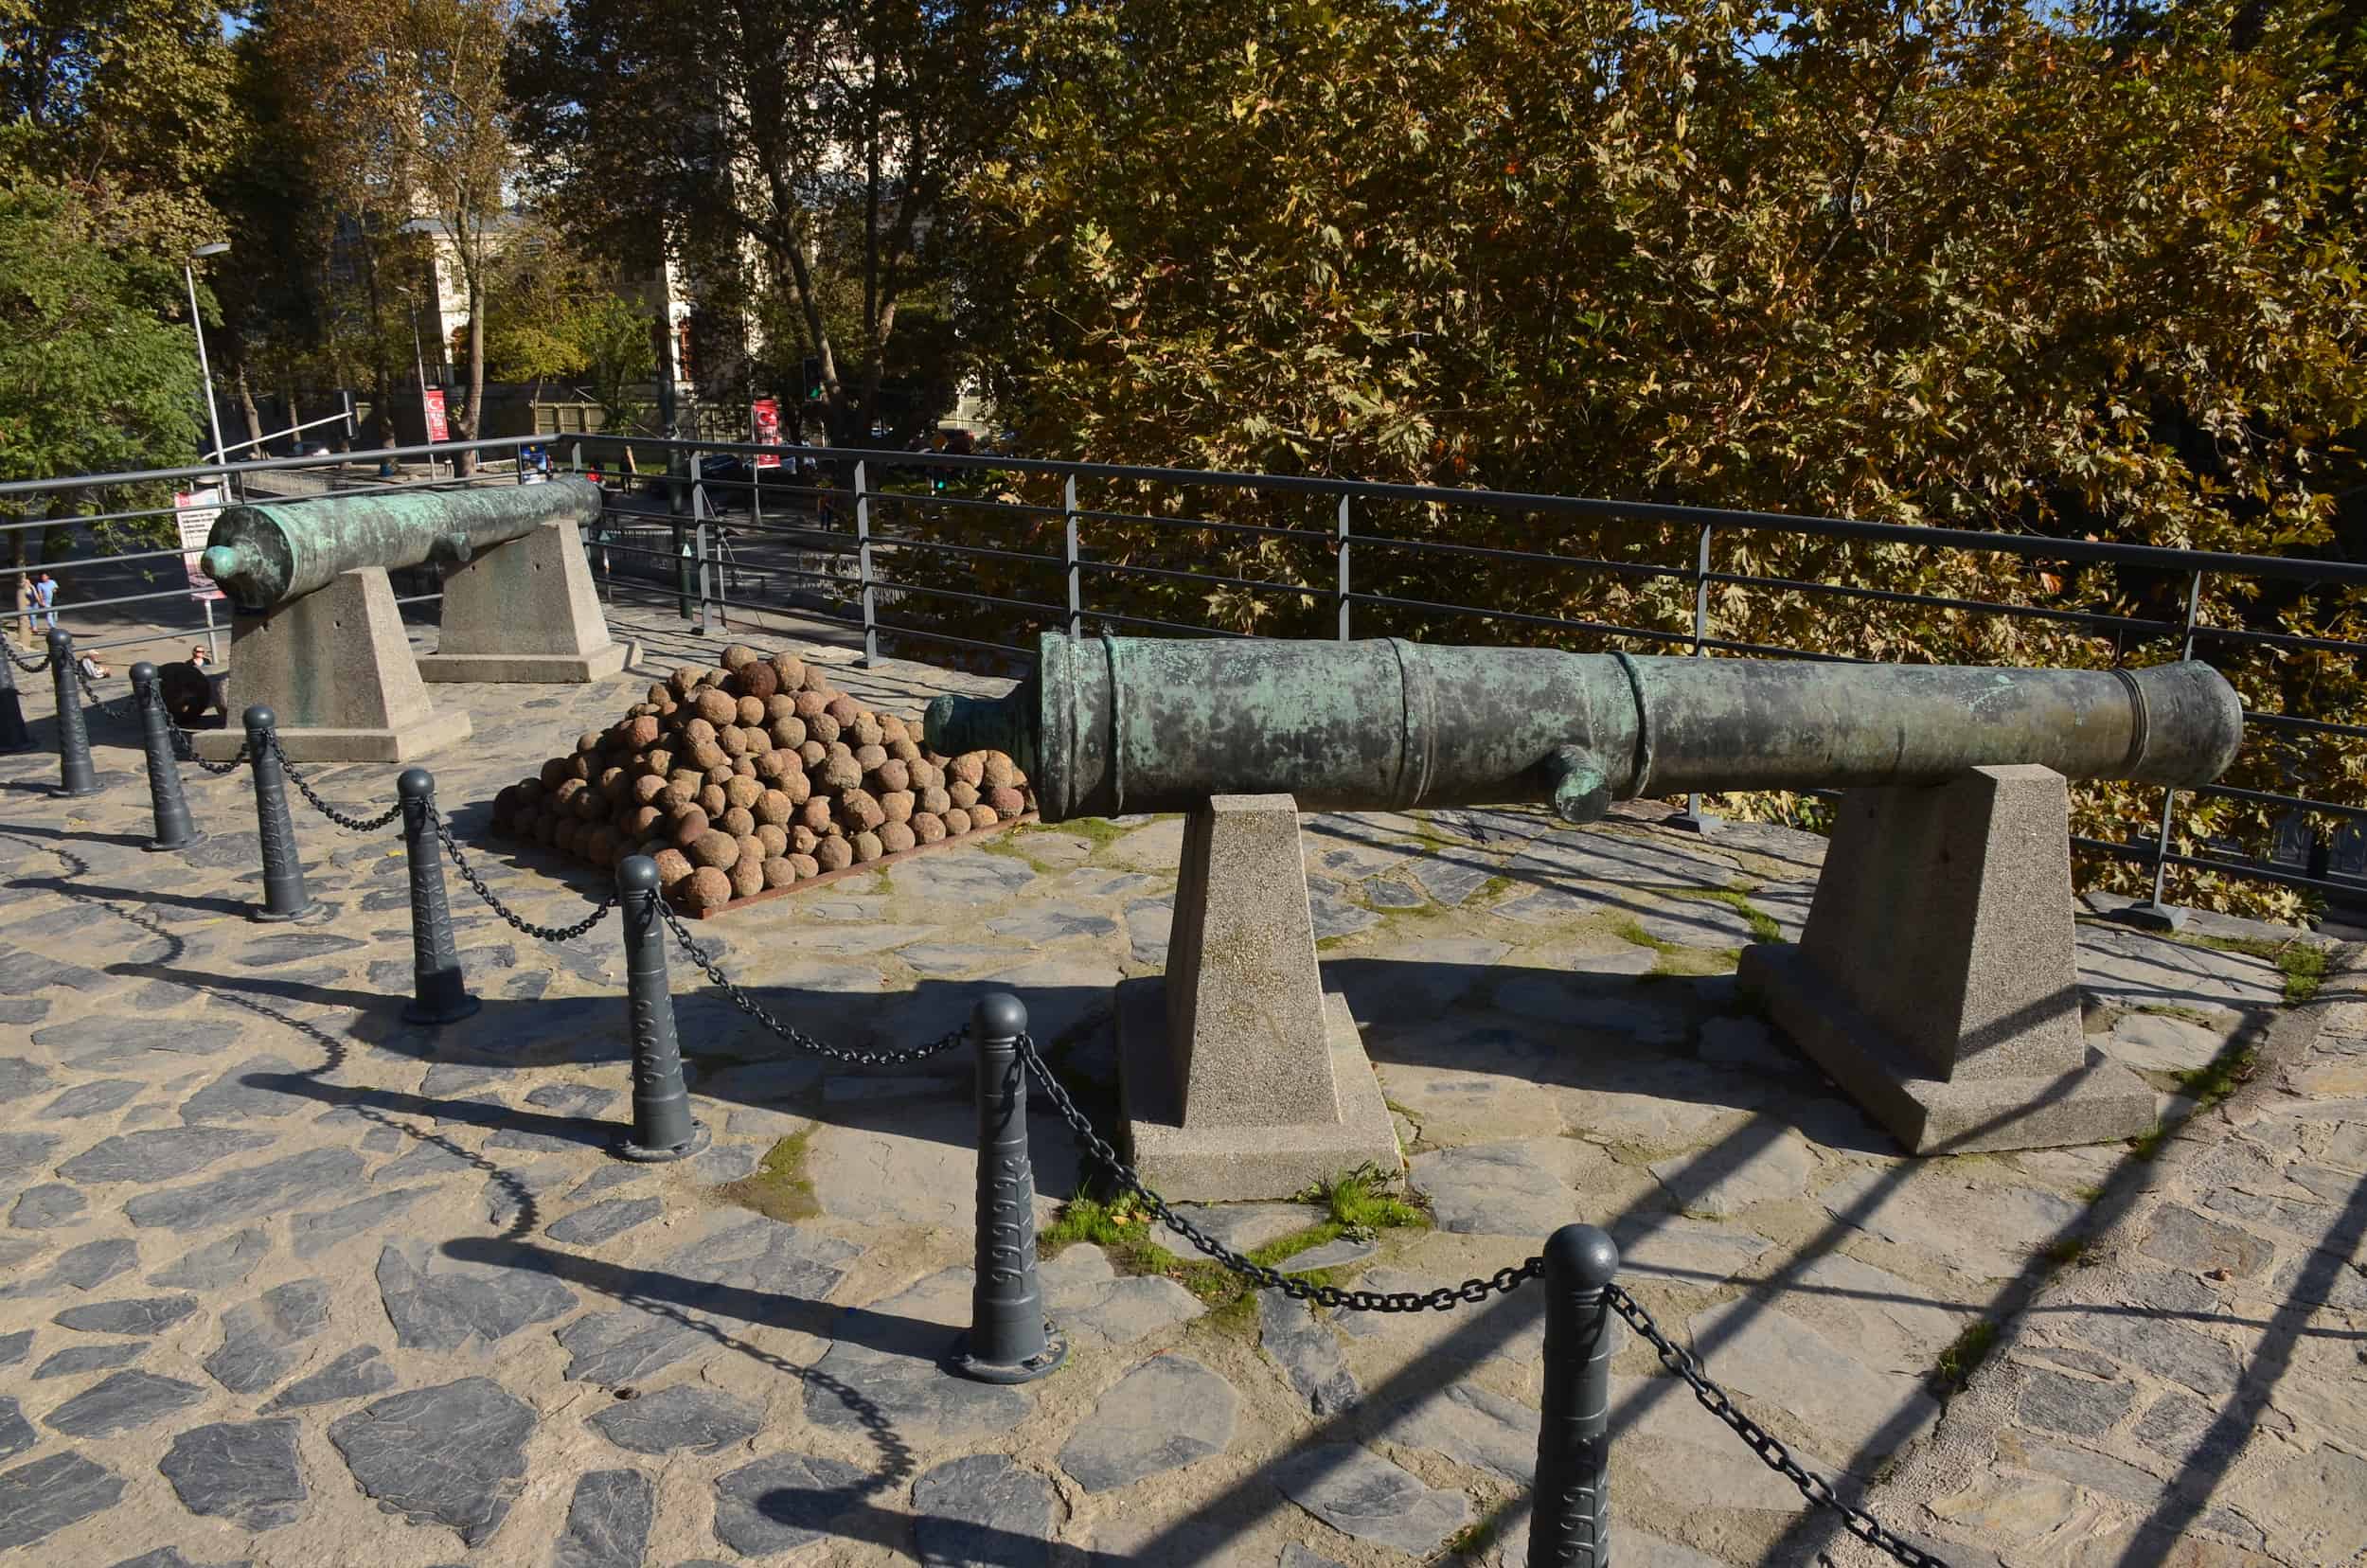 Cannons and cannonballs at Tophane-i Amire Culture and Art Center in Tophane, Istanbul, Turkey